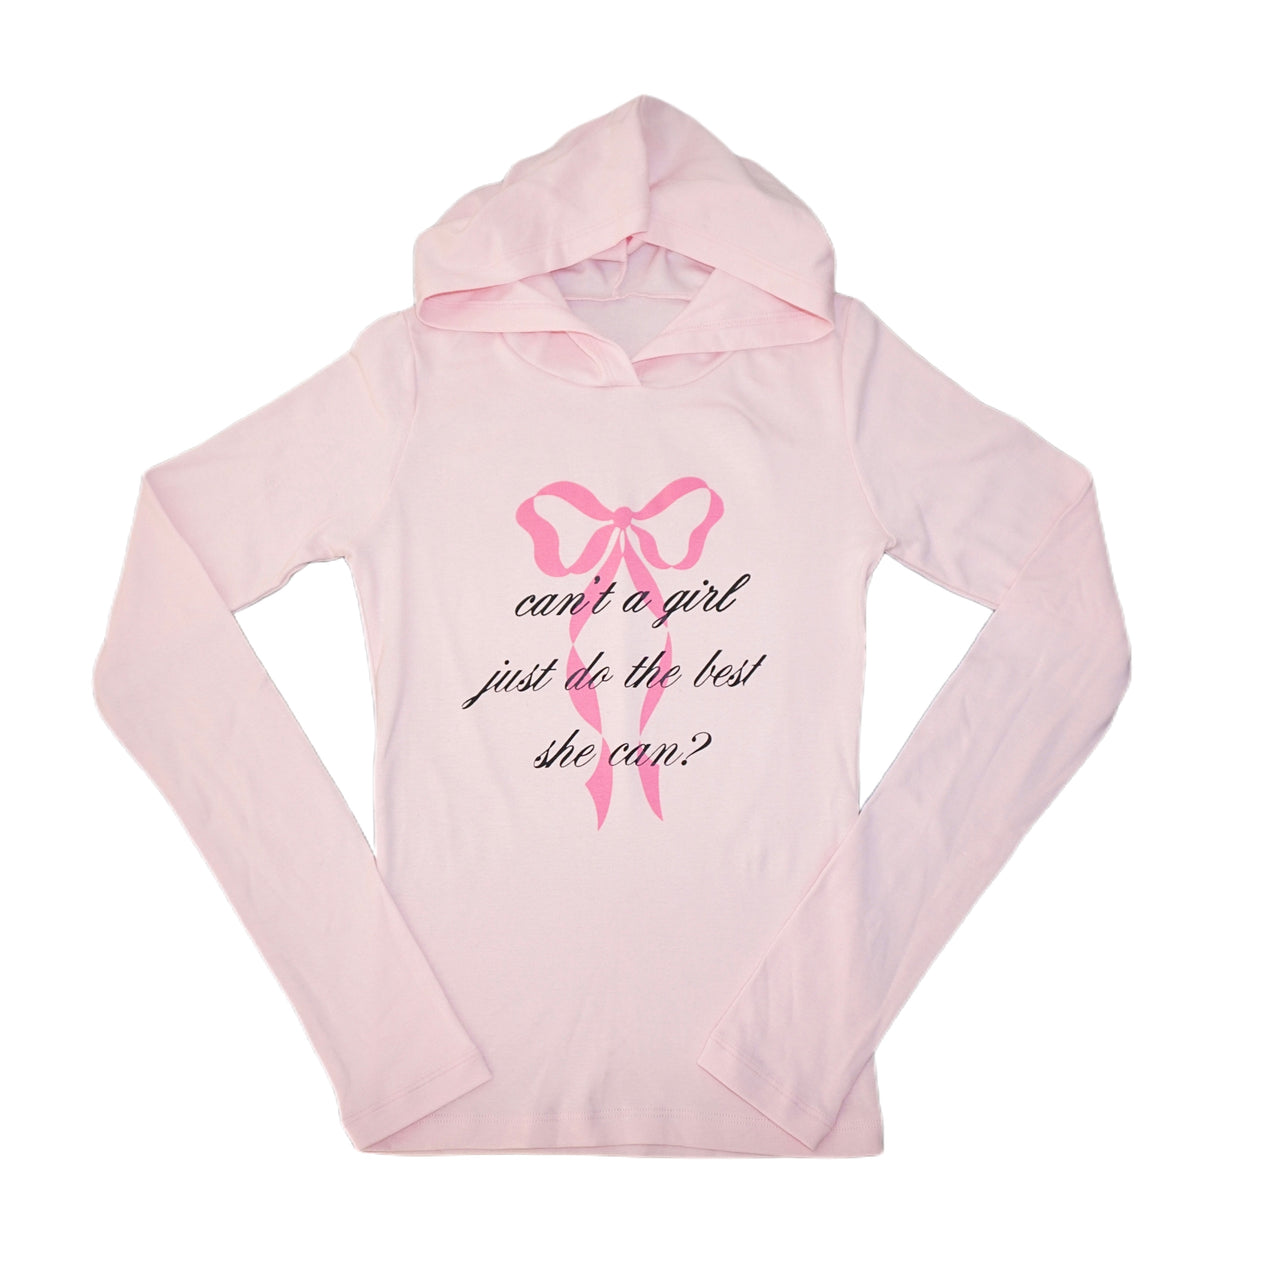 Can't a girl just do the best she can baby pink long sleeve hoodie